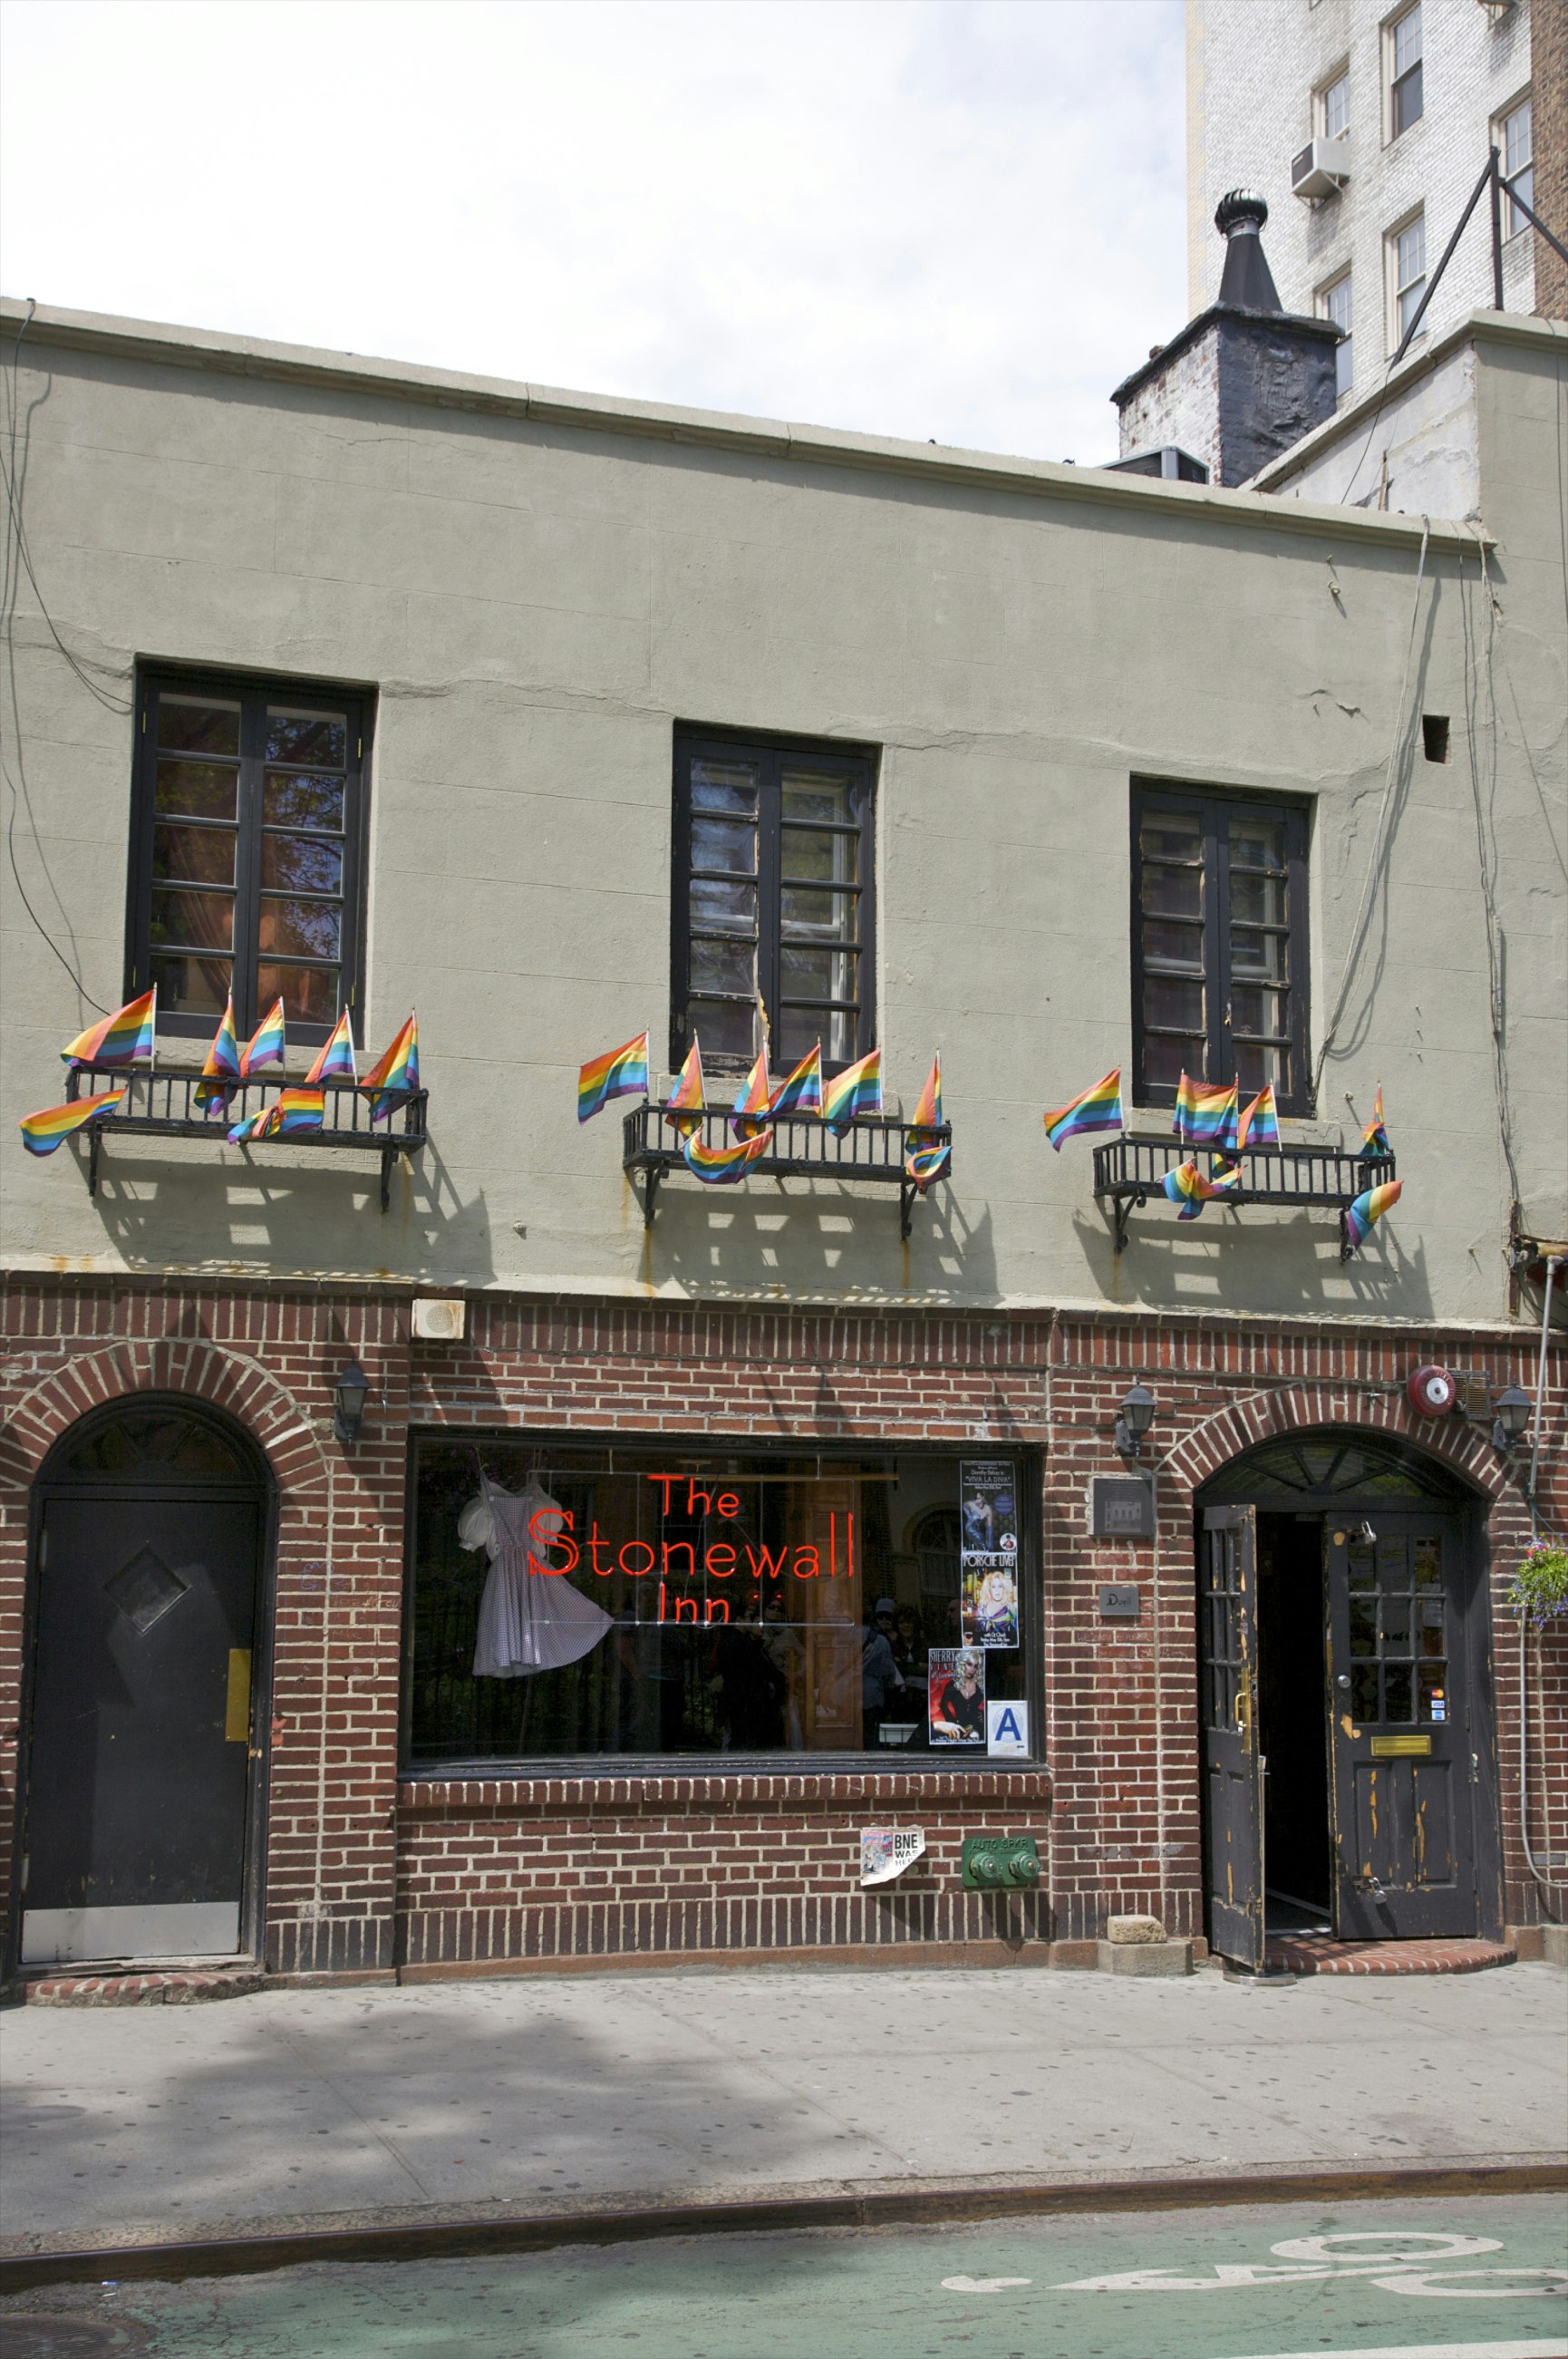 Flags above window with neon sign.